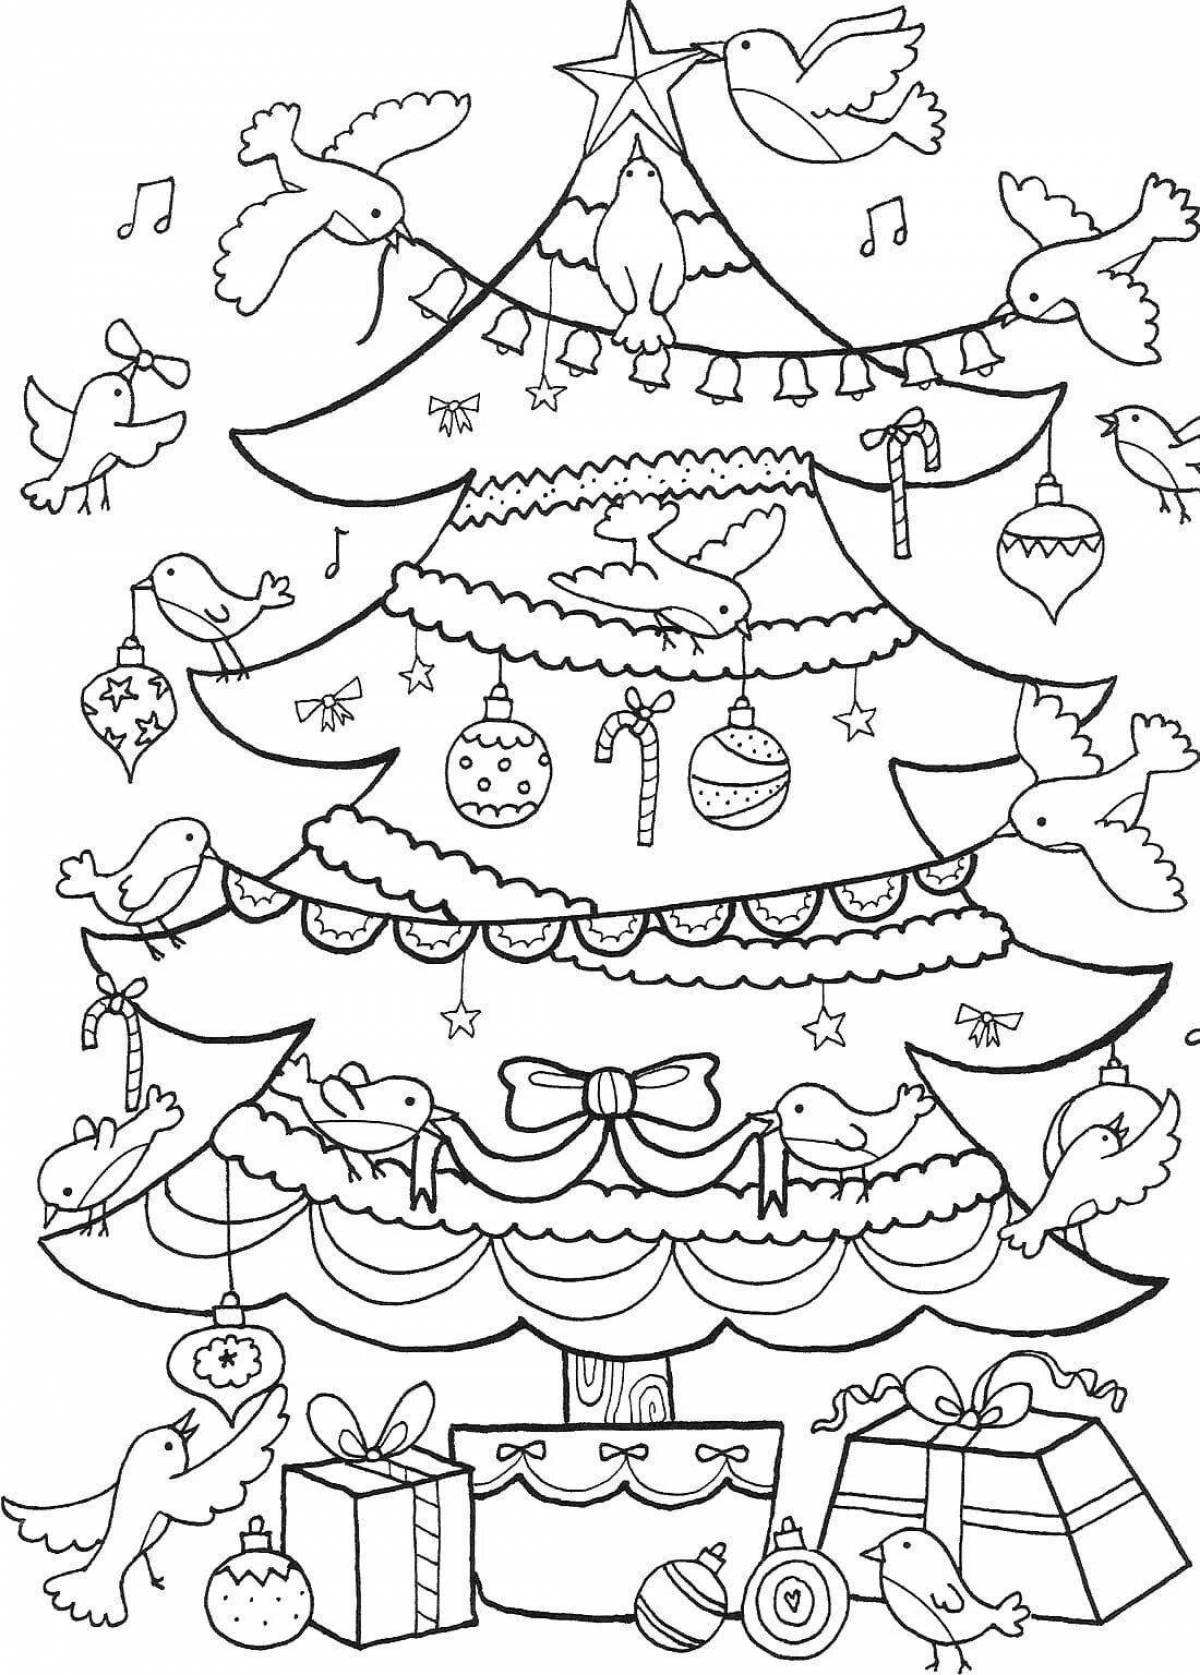 Coloring book shining big tree for kids